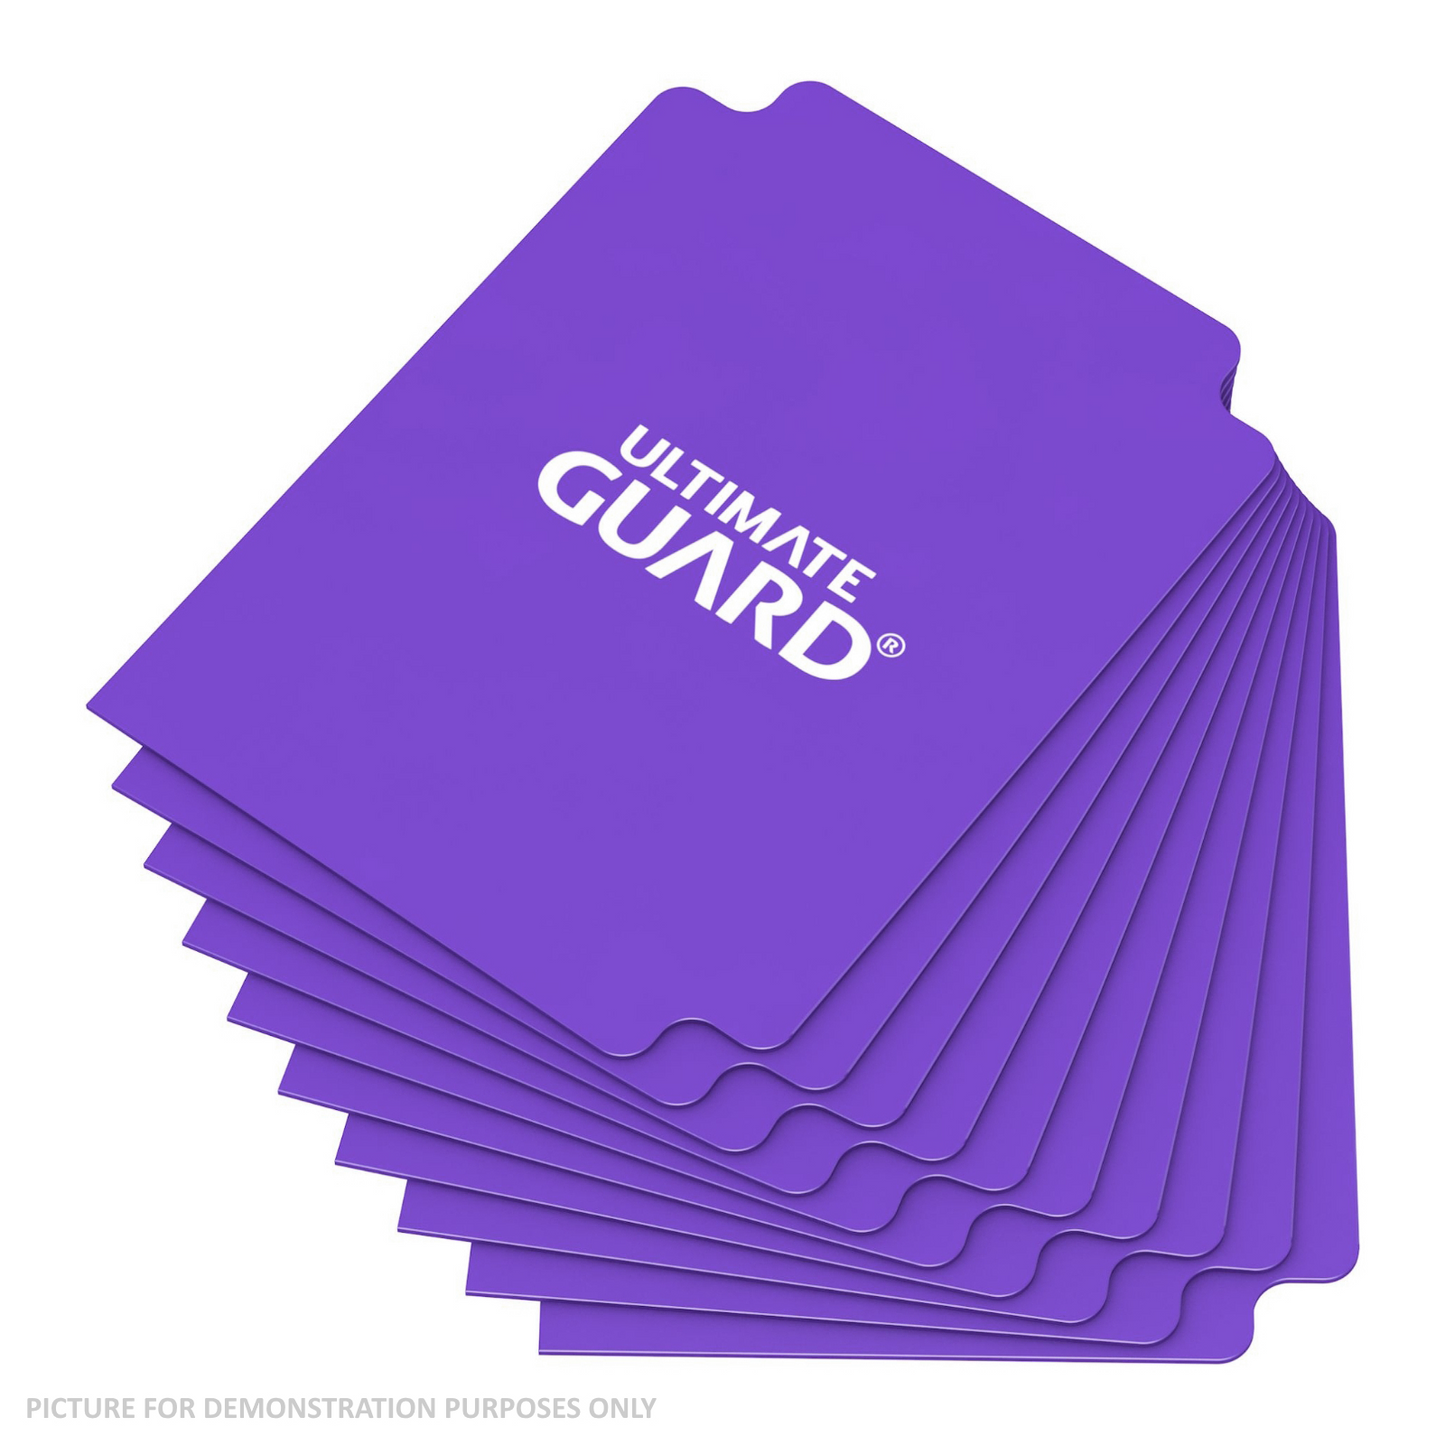 Ultimate Guard Trading Card Storage Dividers Pack of 10 - PURPLE